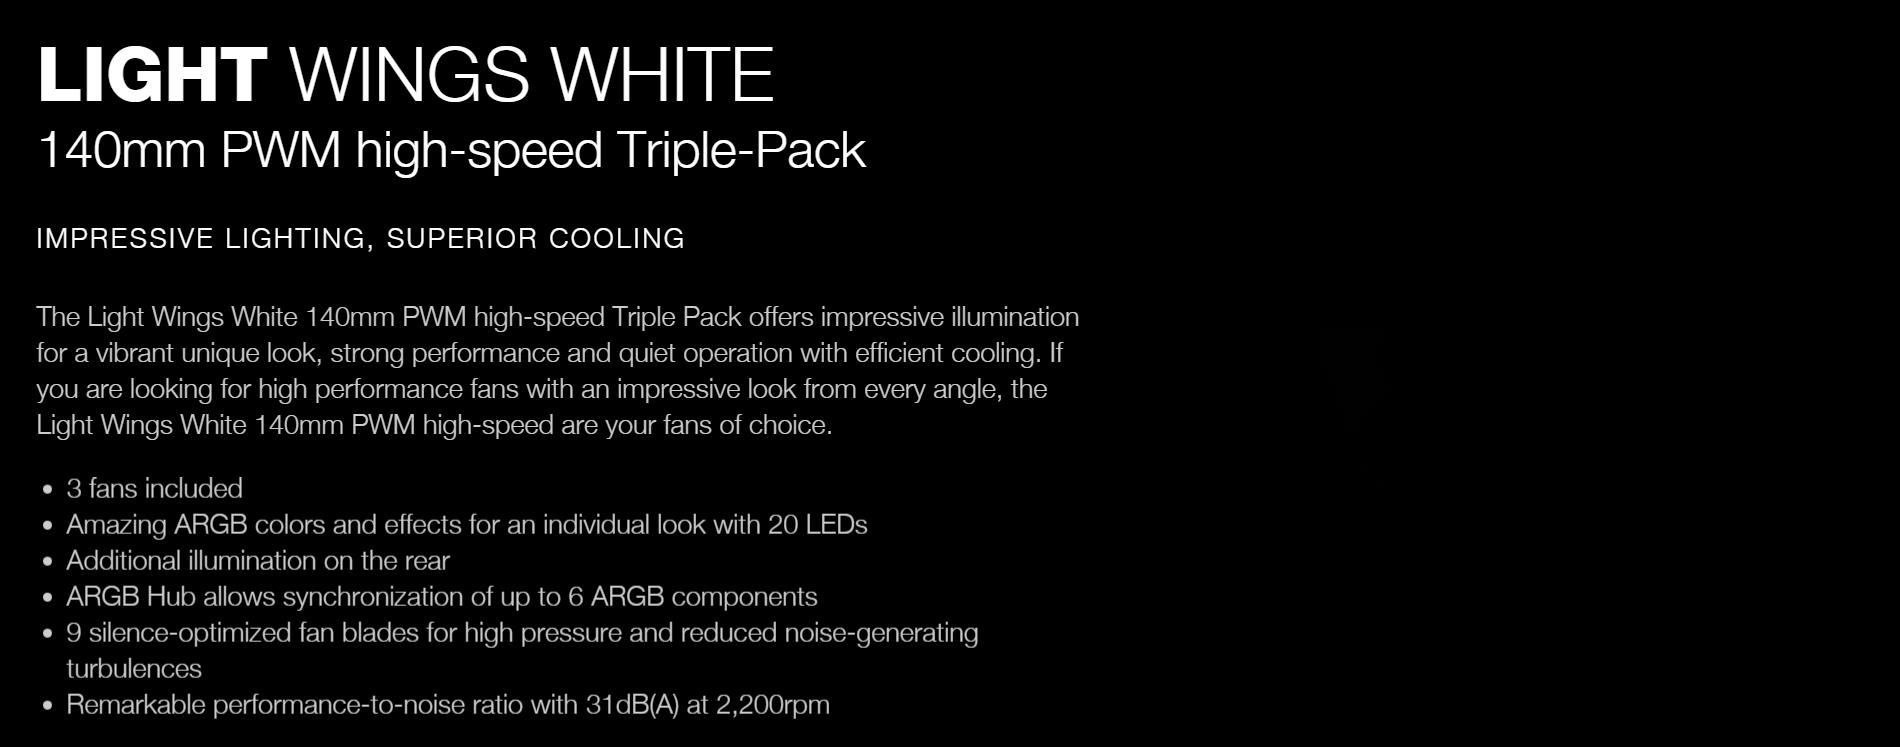 A large marketing image providing additional information about the product be quiet! Light Wings High-Speed 140mm PWM Fan Triple Pack - White - Additional alt info not provided